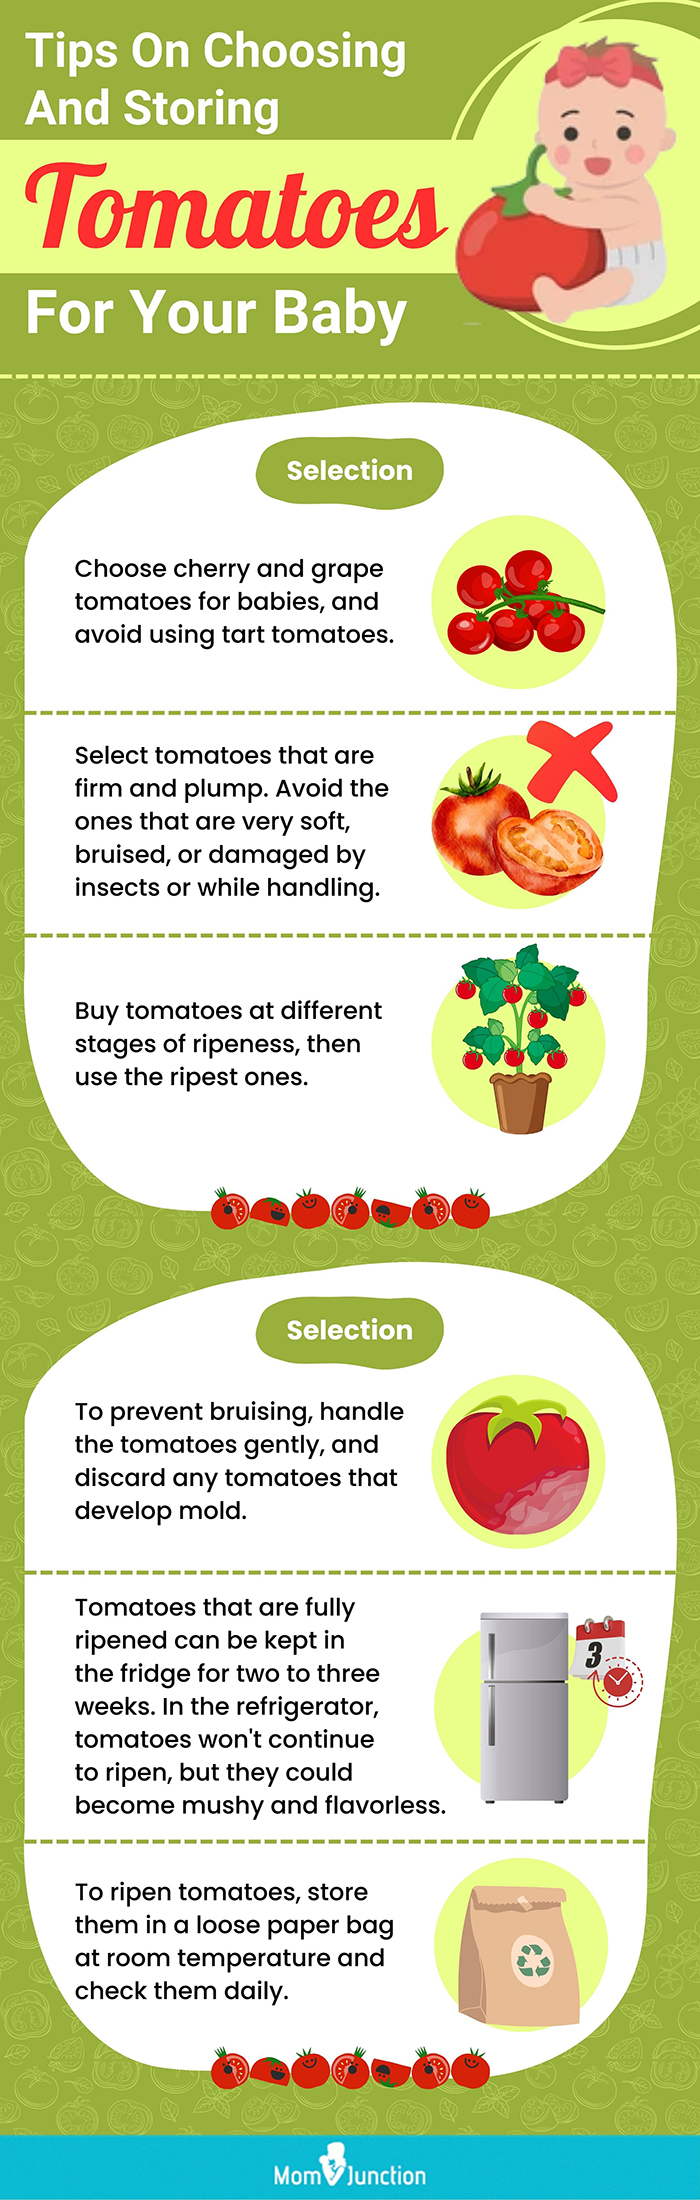 tips on choosing and storing tomatoes for your baby (infographic)